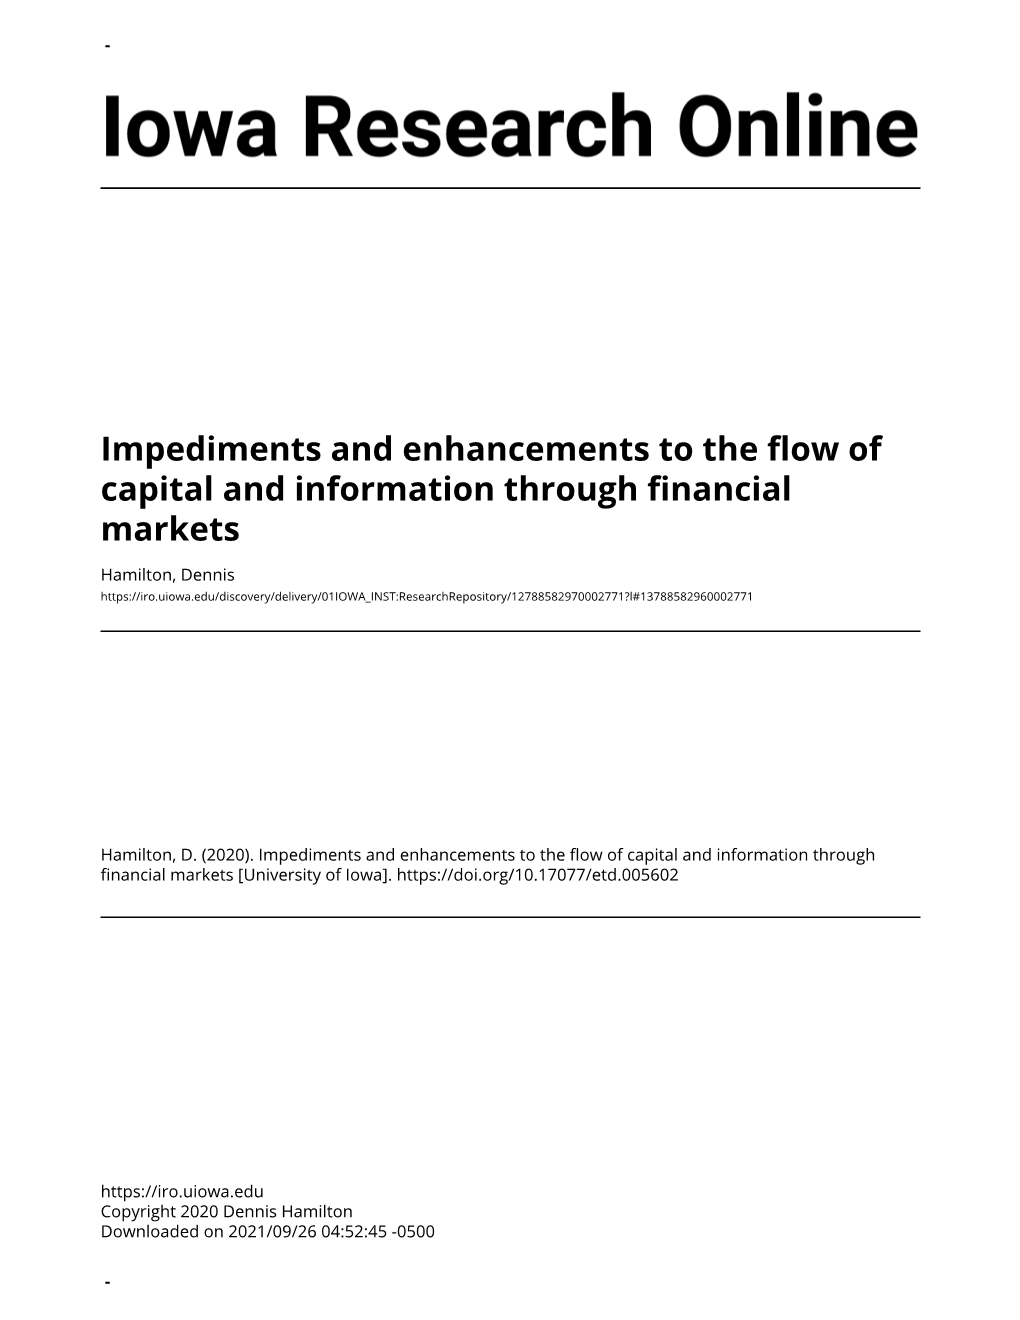 Impediments and Enhancements to the Flow of Capital and Information Through Financial Markets